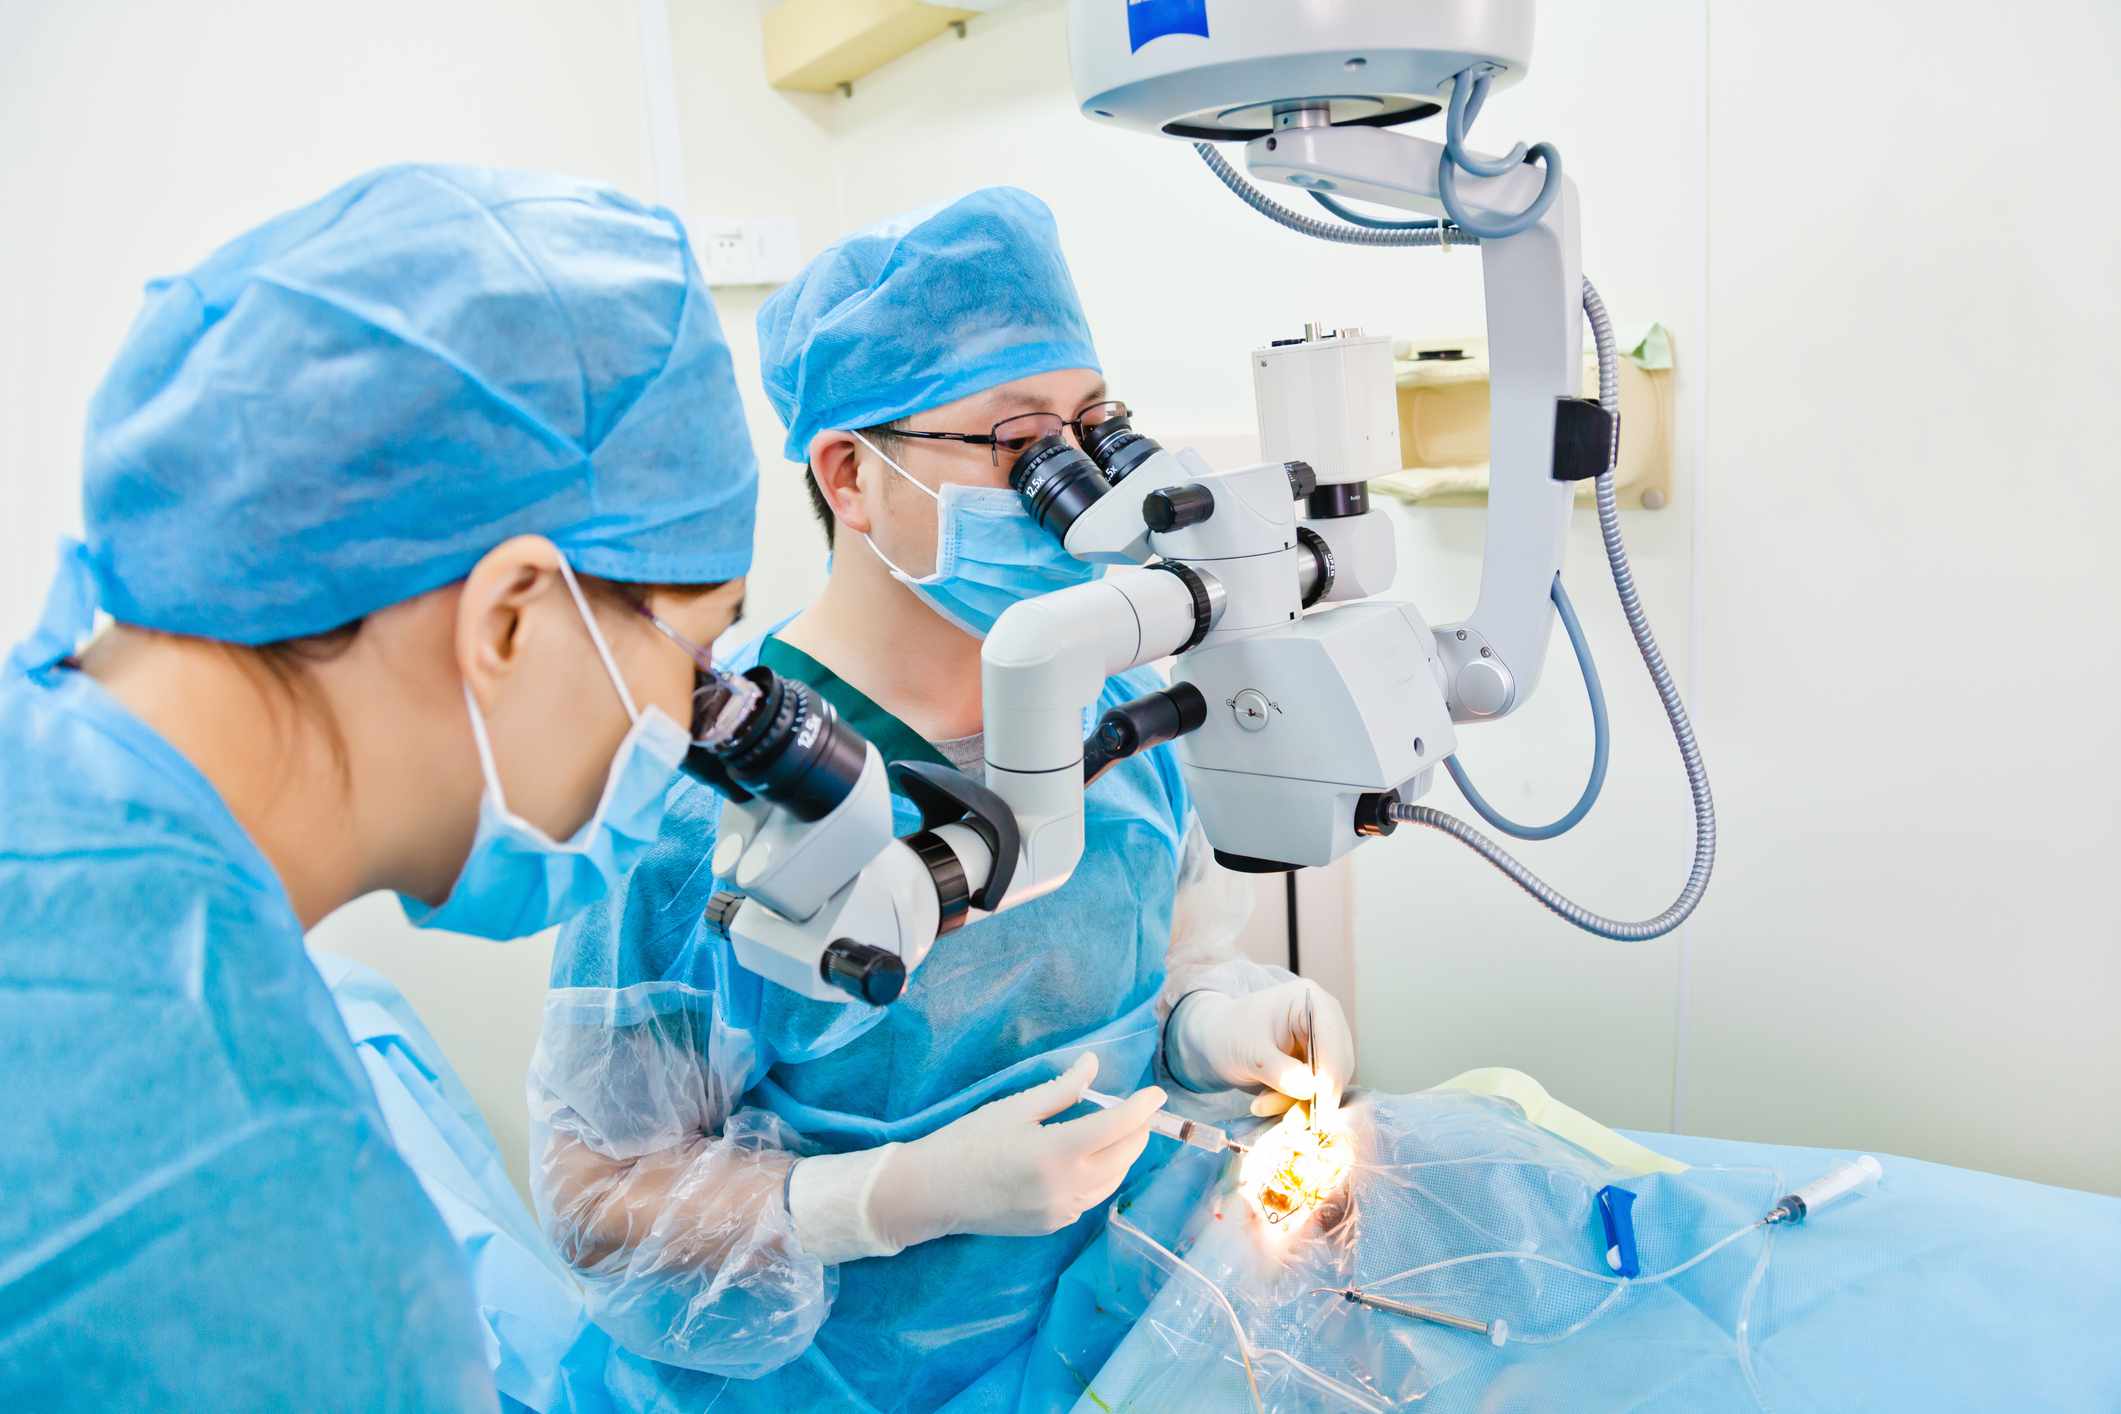 Why has LASIK Eye Surgery been so popular?